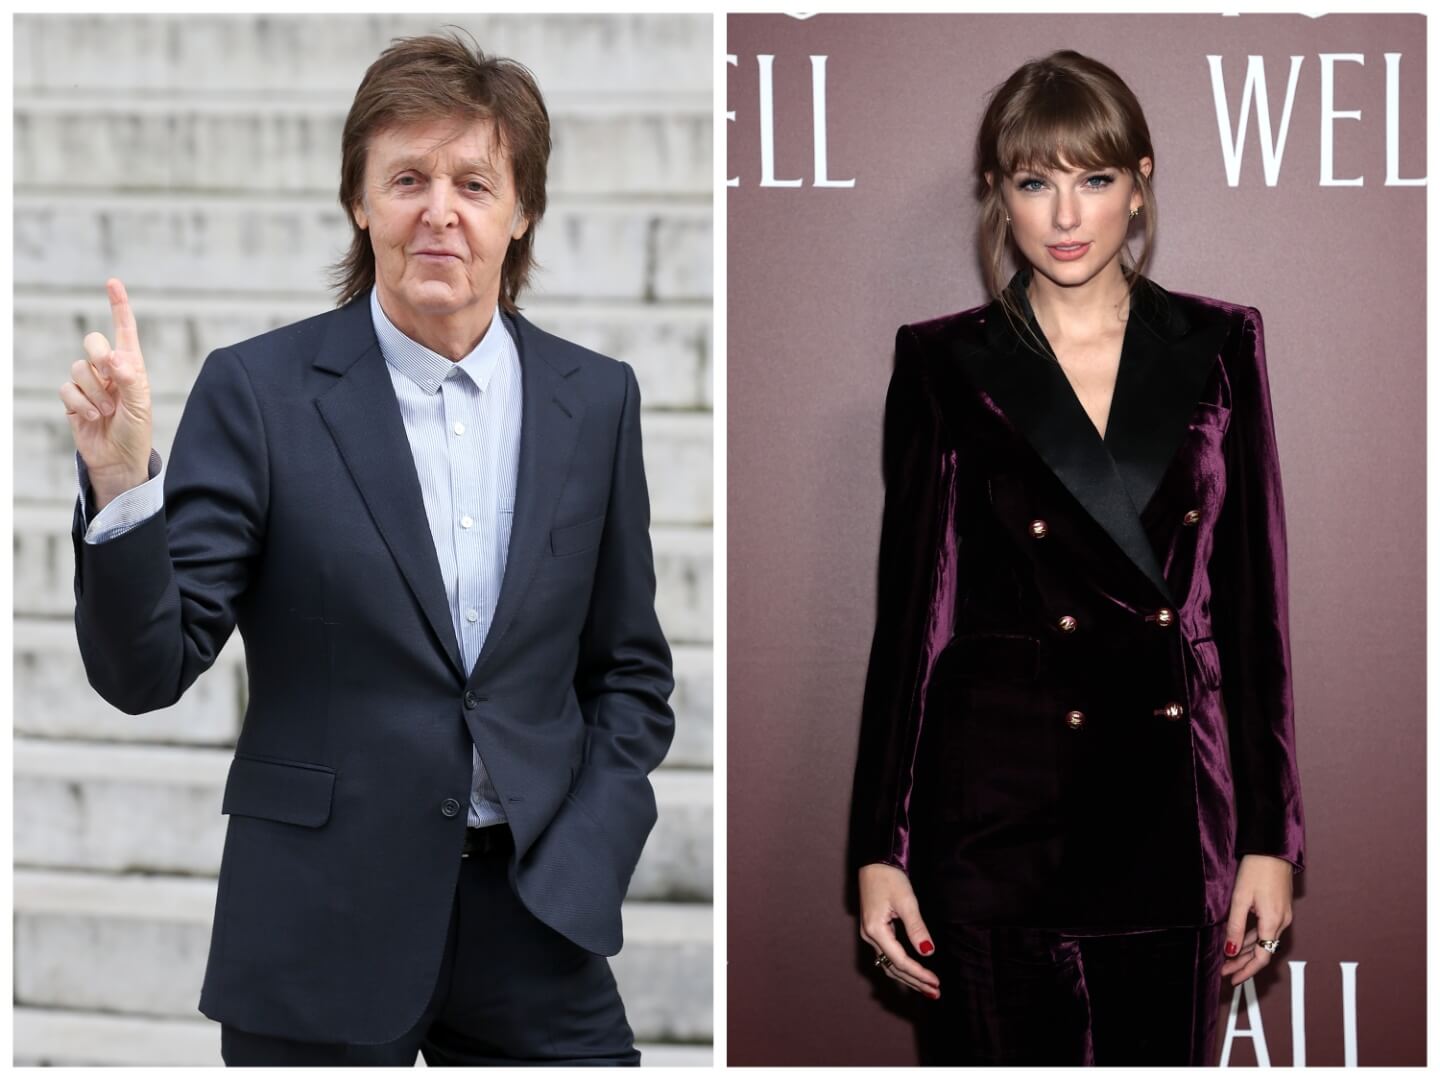 Paul McCartney stands on stone steps and holds up his index finger. Taylor Swift wears a maroon jacket.